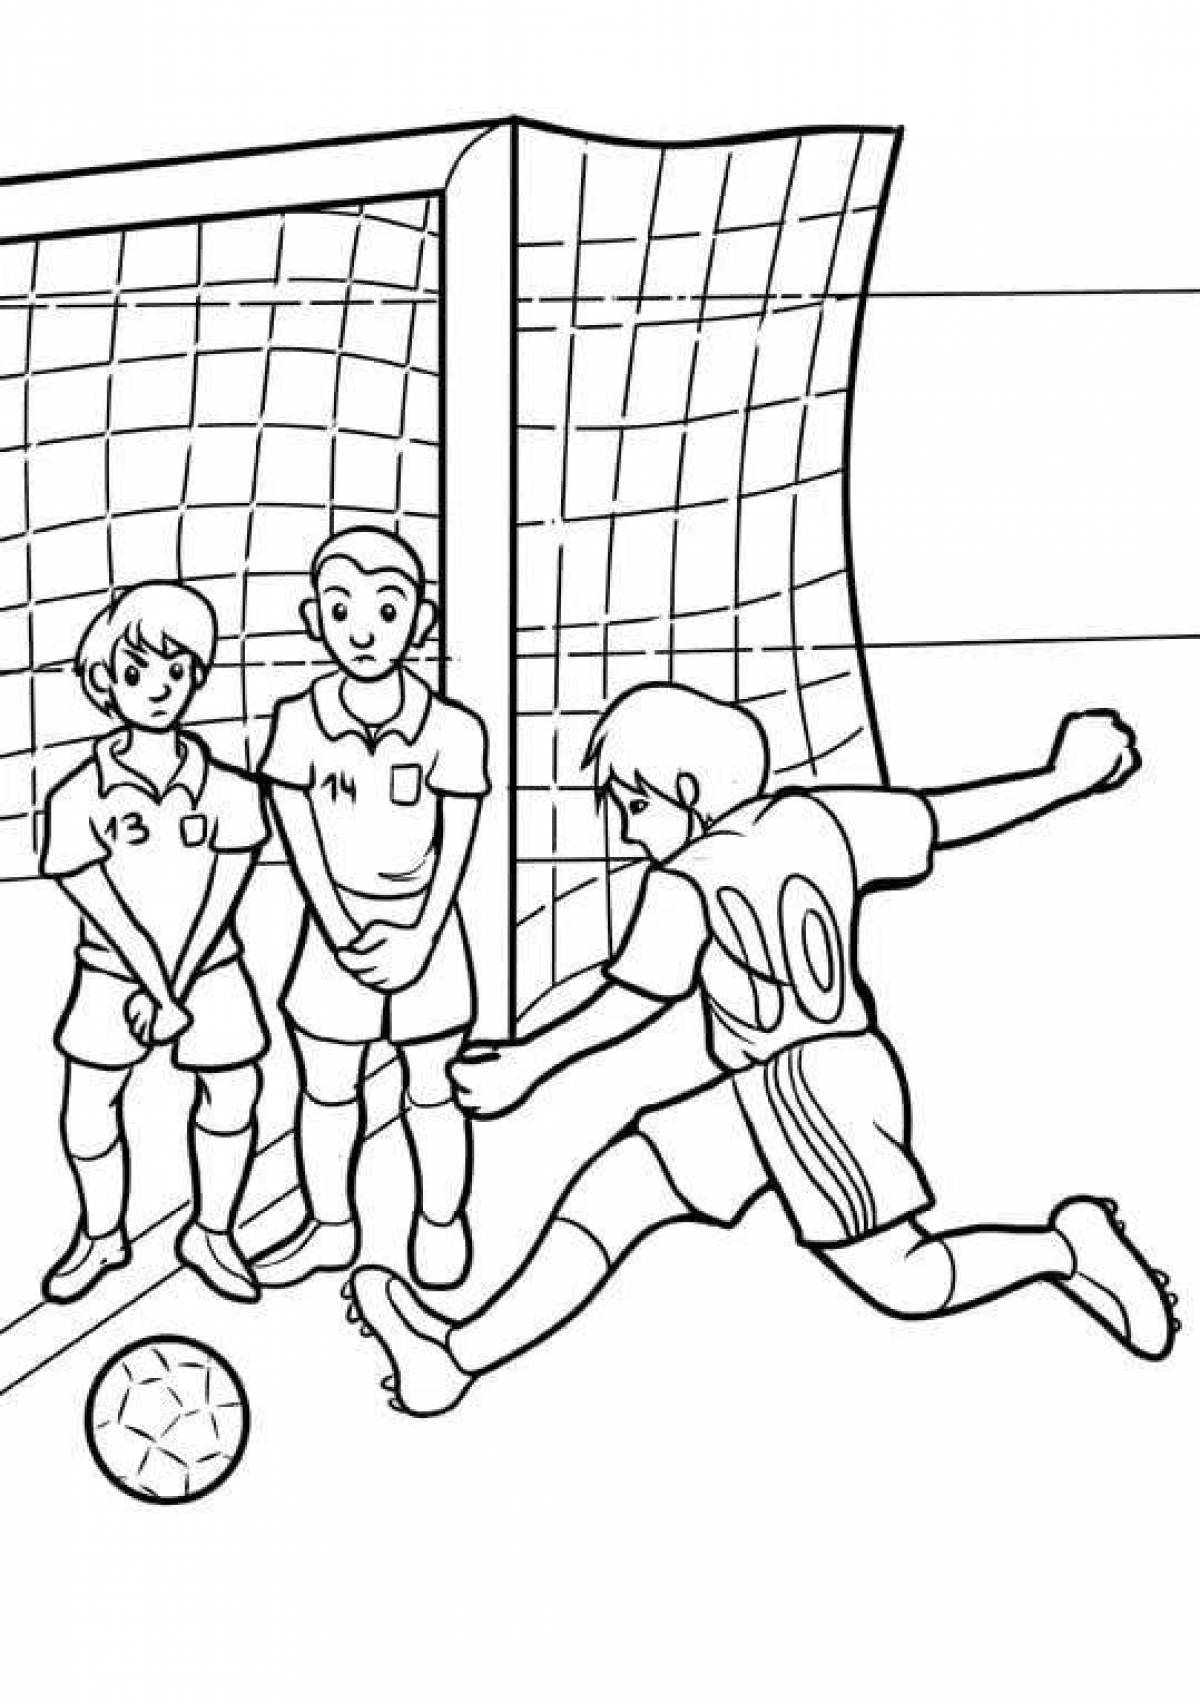 Coloring page adorable football for boys